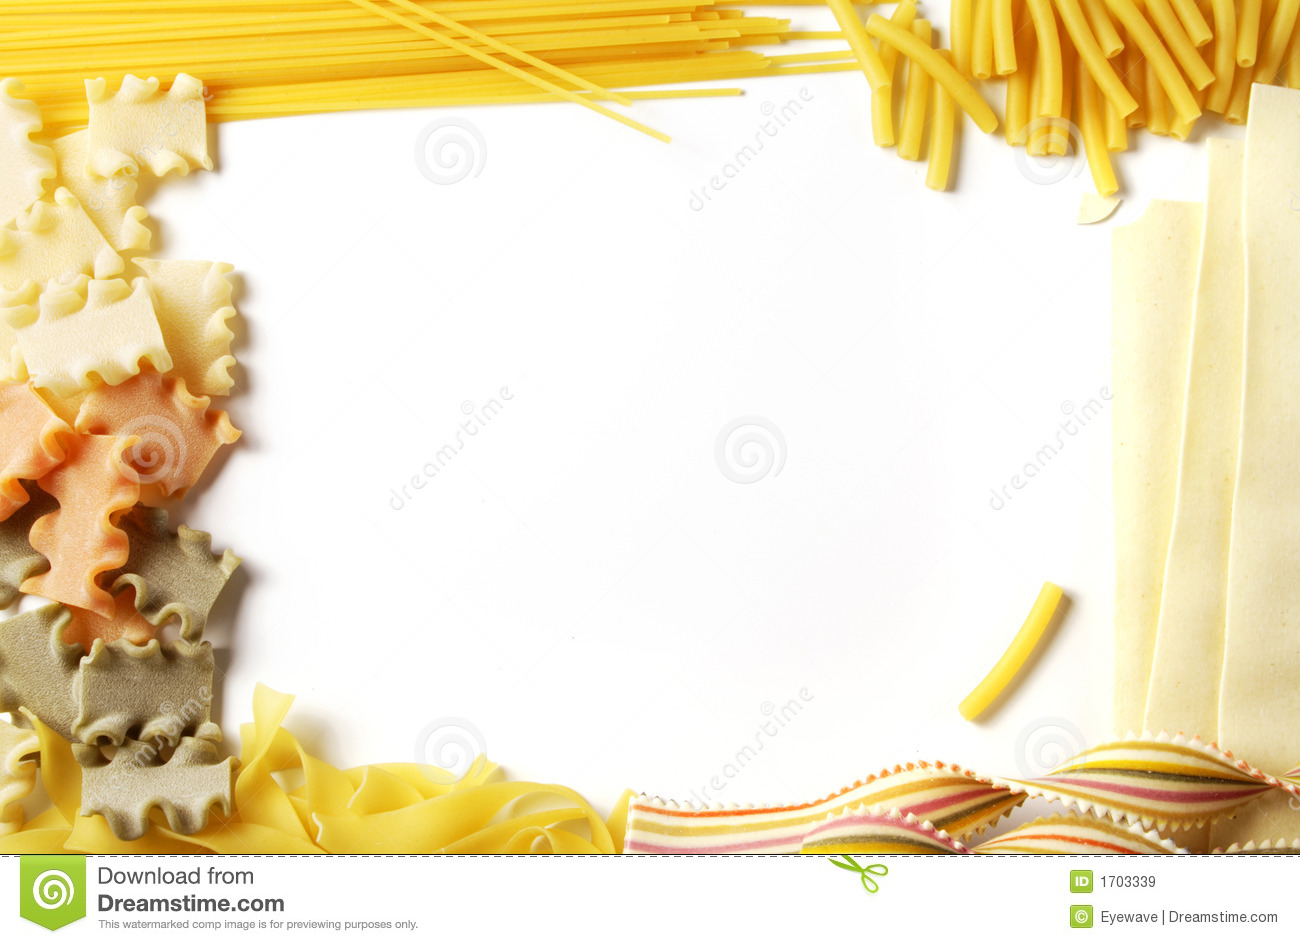 Frame Of Pasta Royalty Free Stock Images   Image  1703339